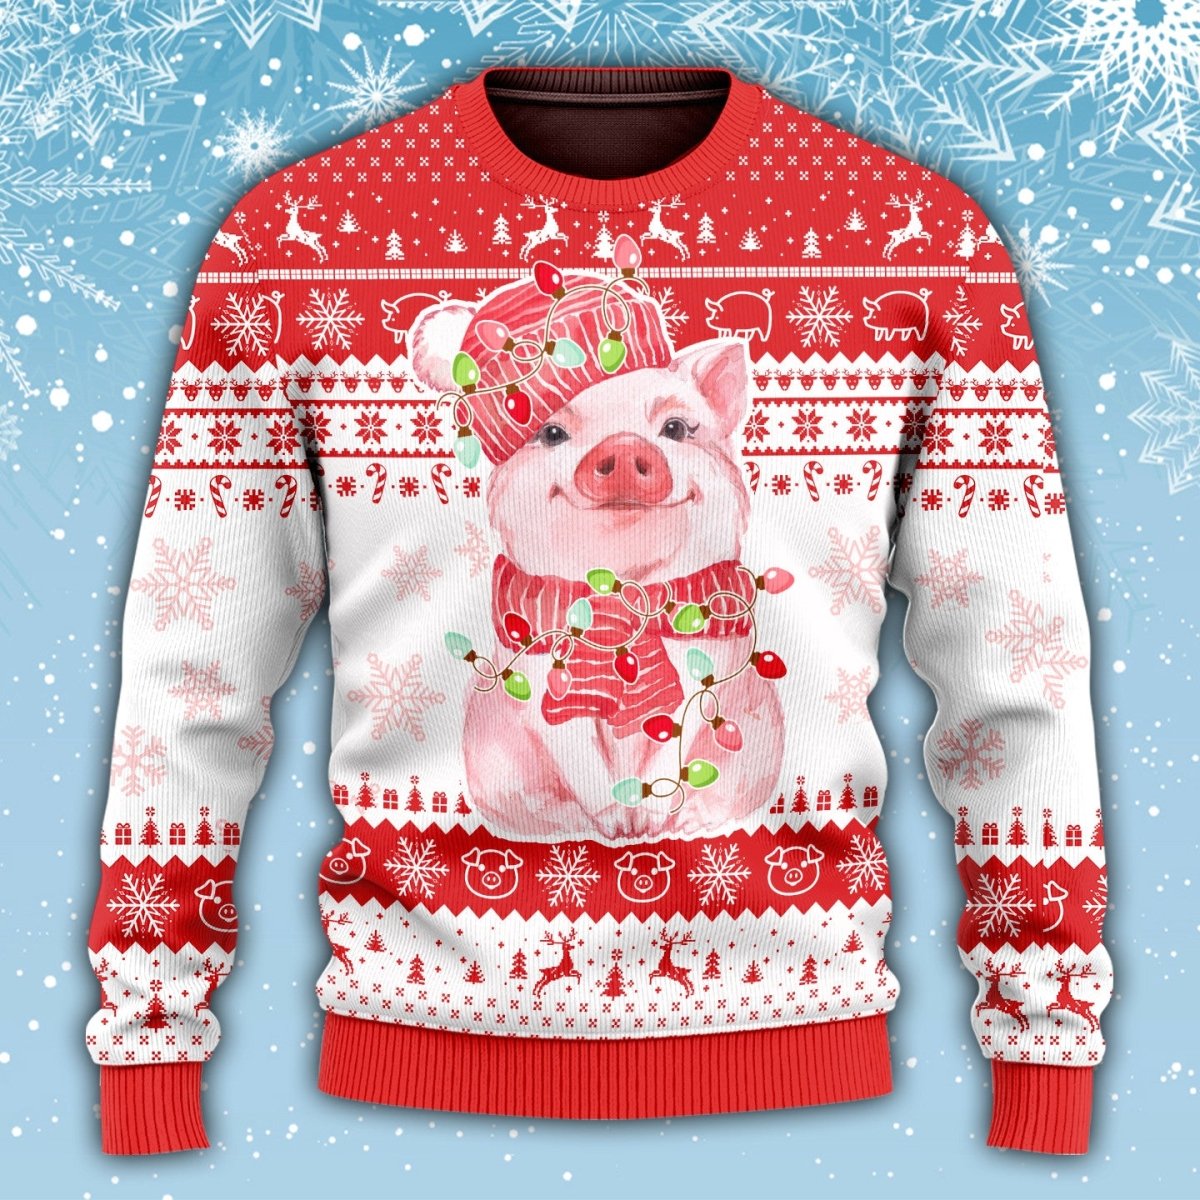 Pig Winter Christmas Ugly Sweater - TG1121HN